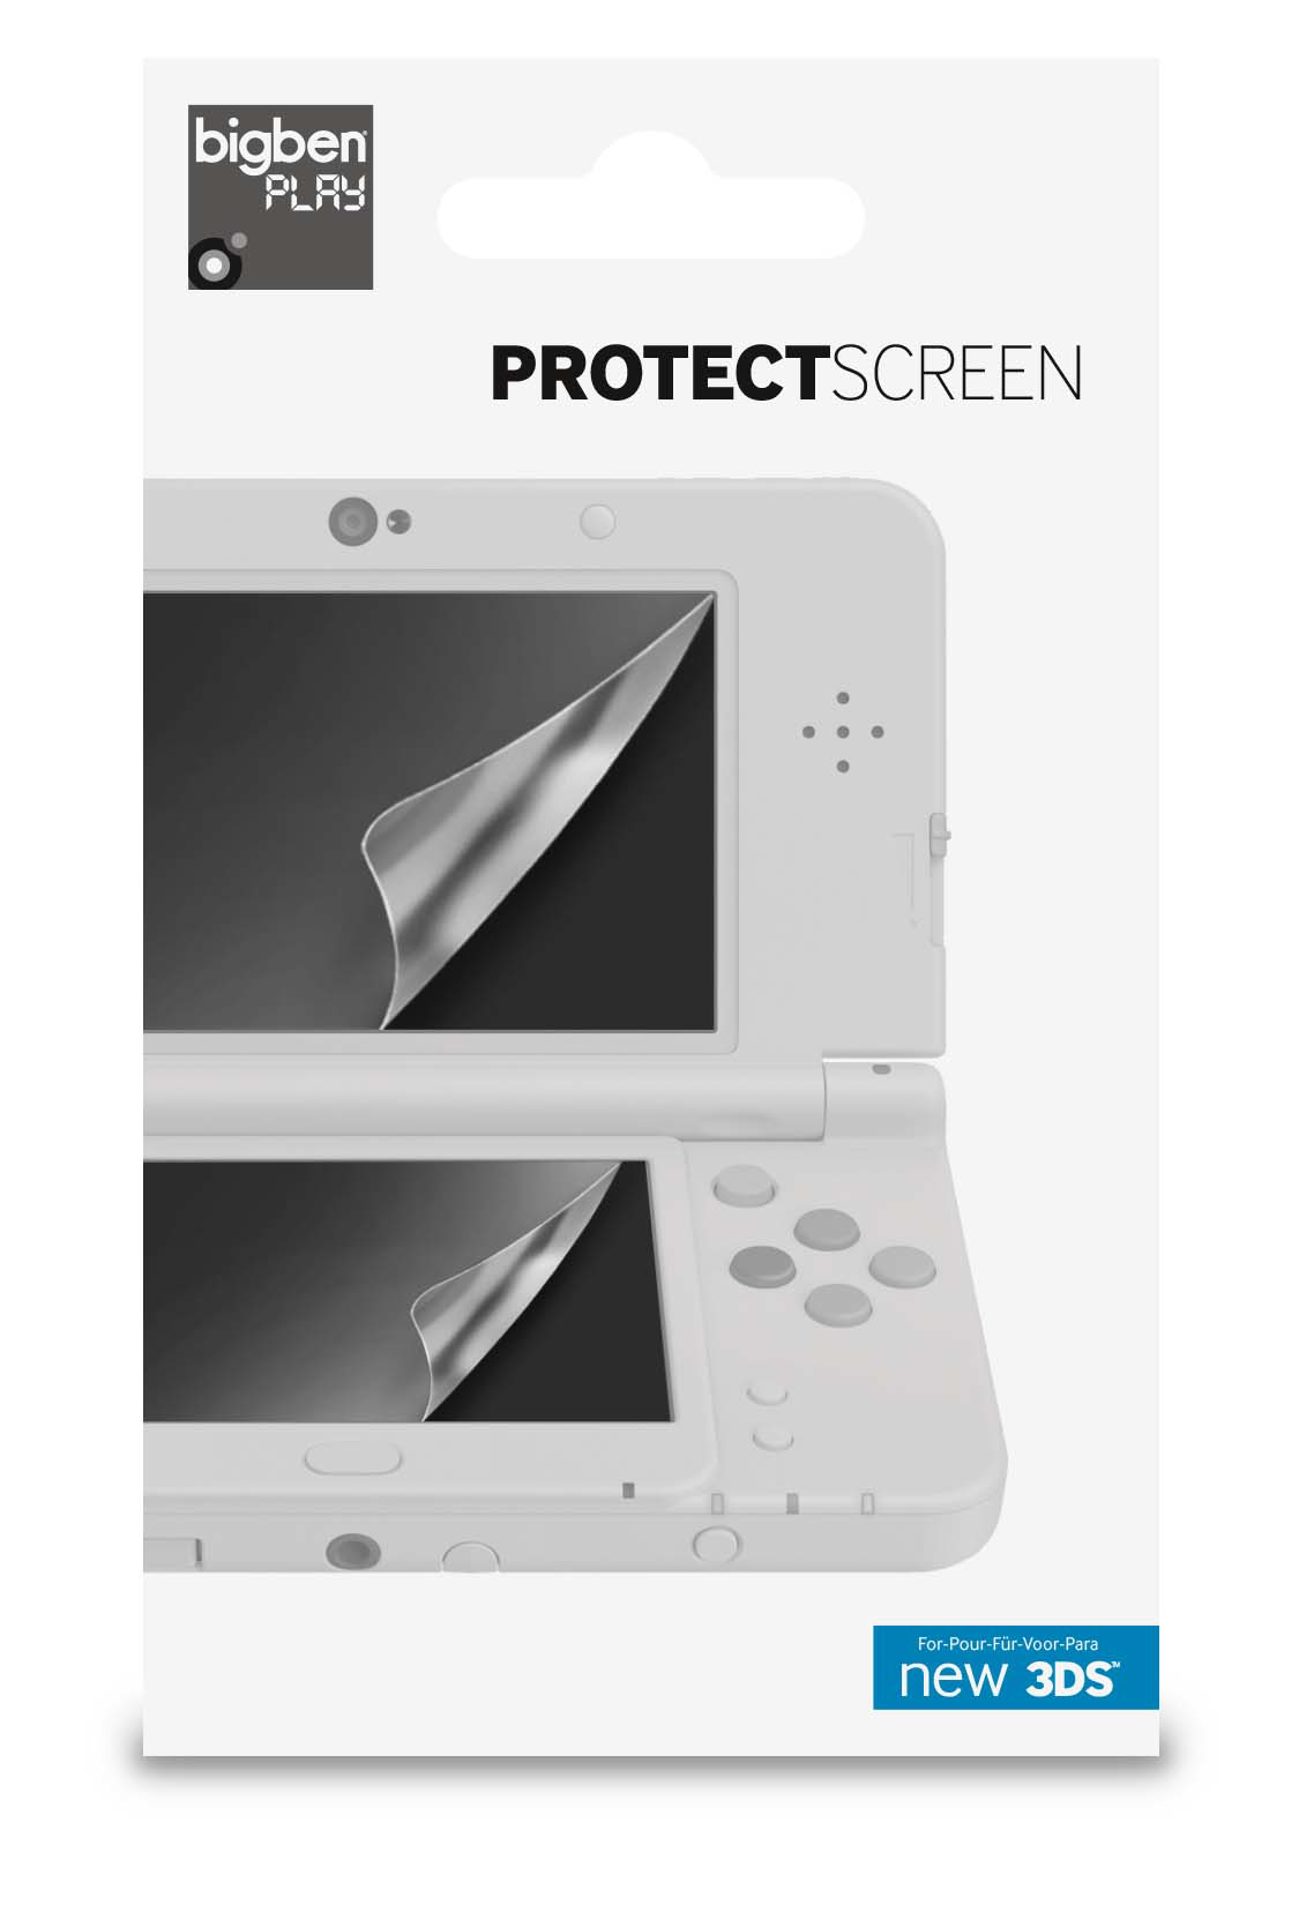 § New 3DS Protect Screen